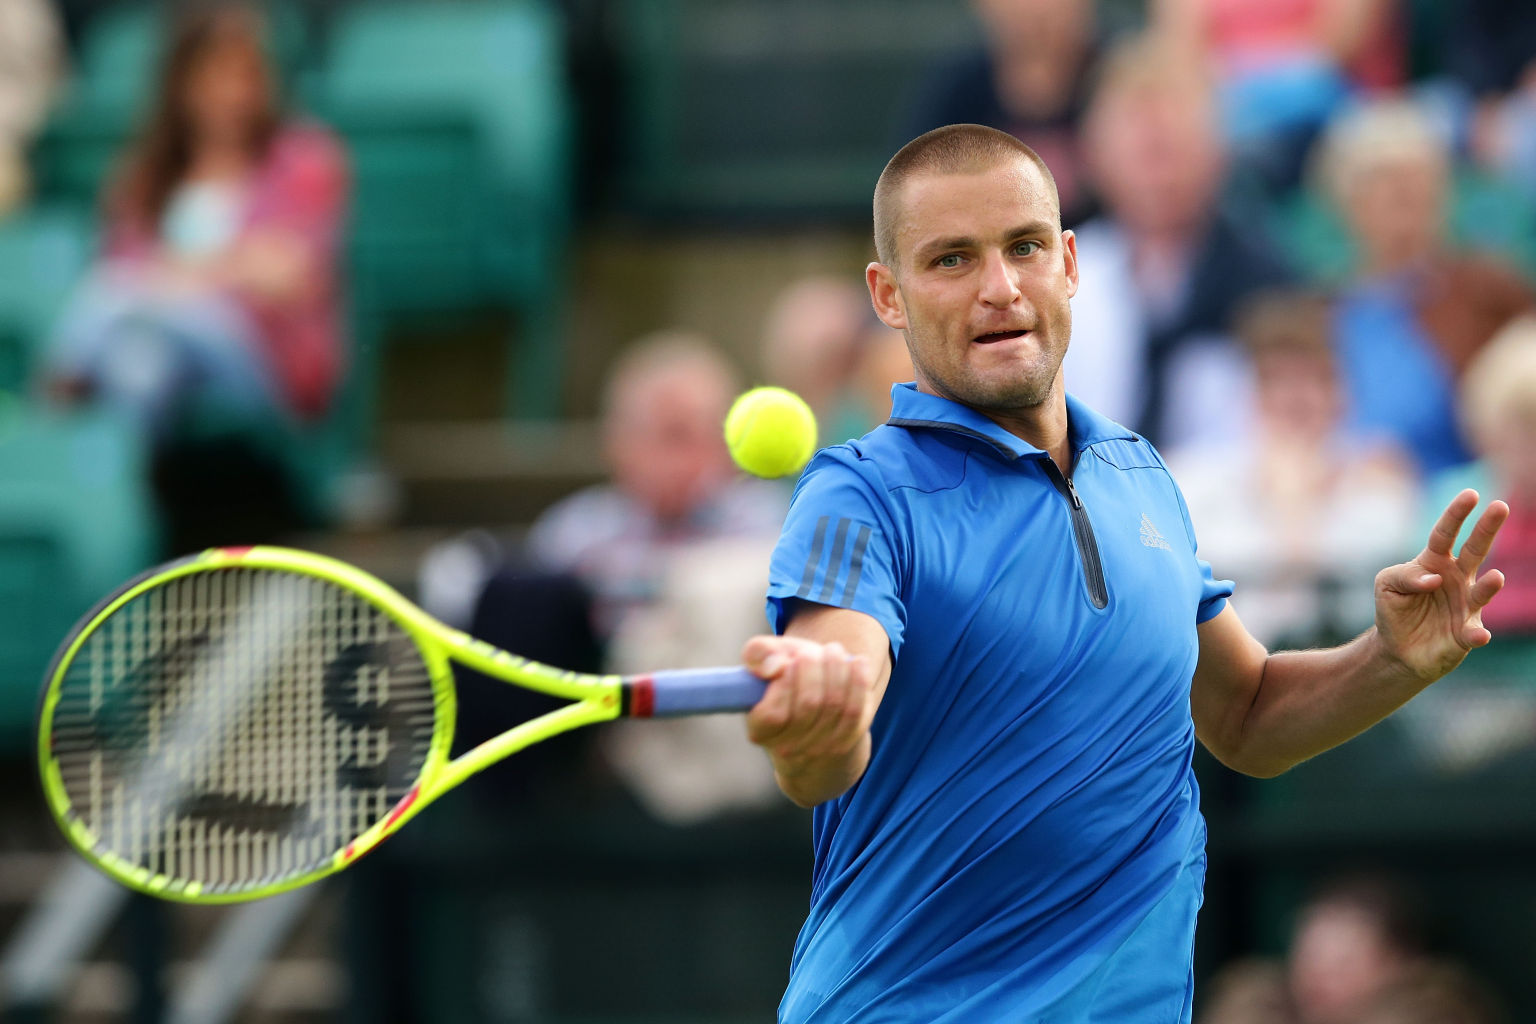 NOTTINGHAM, ENGLAND - JUNE 22:  Mikhail Youzhny of Russia plays a forehand during his men's singles match against Gilles Muller of Luxembourg during day three of the ATP Aegon Open Nottingham at Nottingham Tennis Centre on June 22, 2016 in Nottingham, England.  (Photo by Daniel Smith/Getty Images)